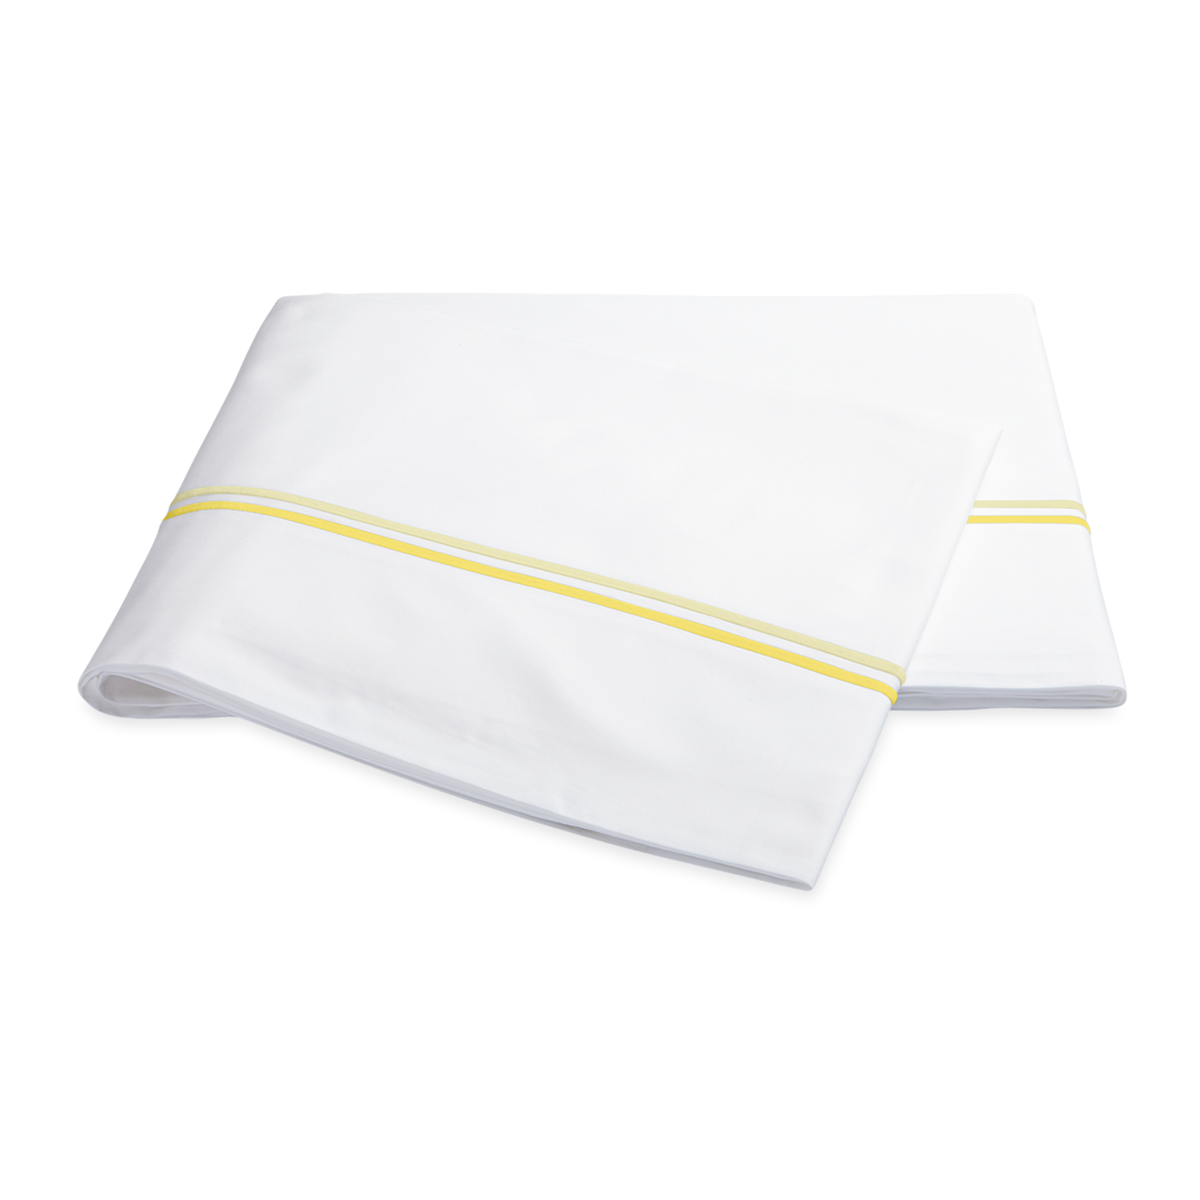 Flat Sheet of Matouk Essex Bedding Collection in Lemon Color